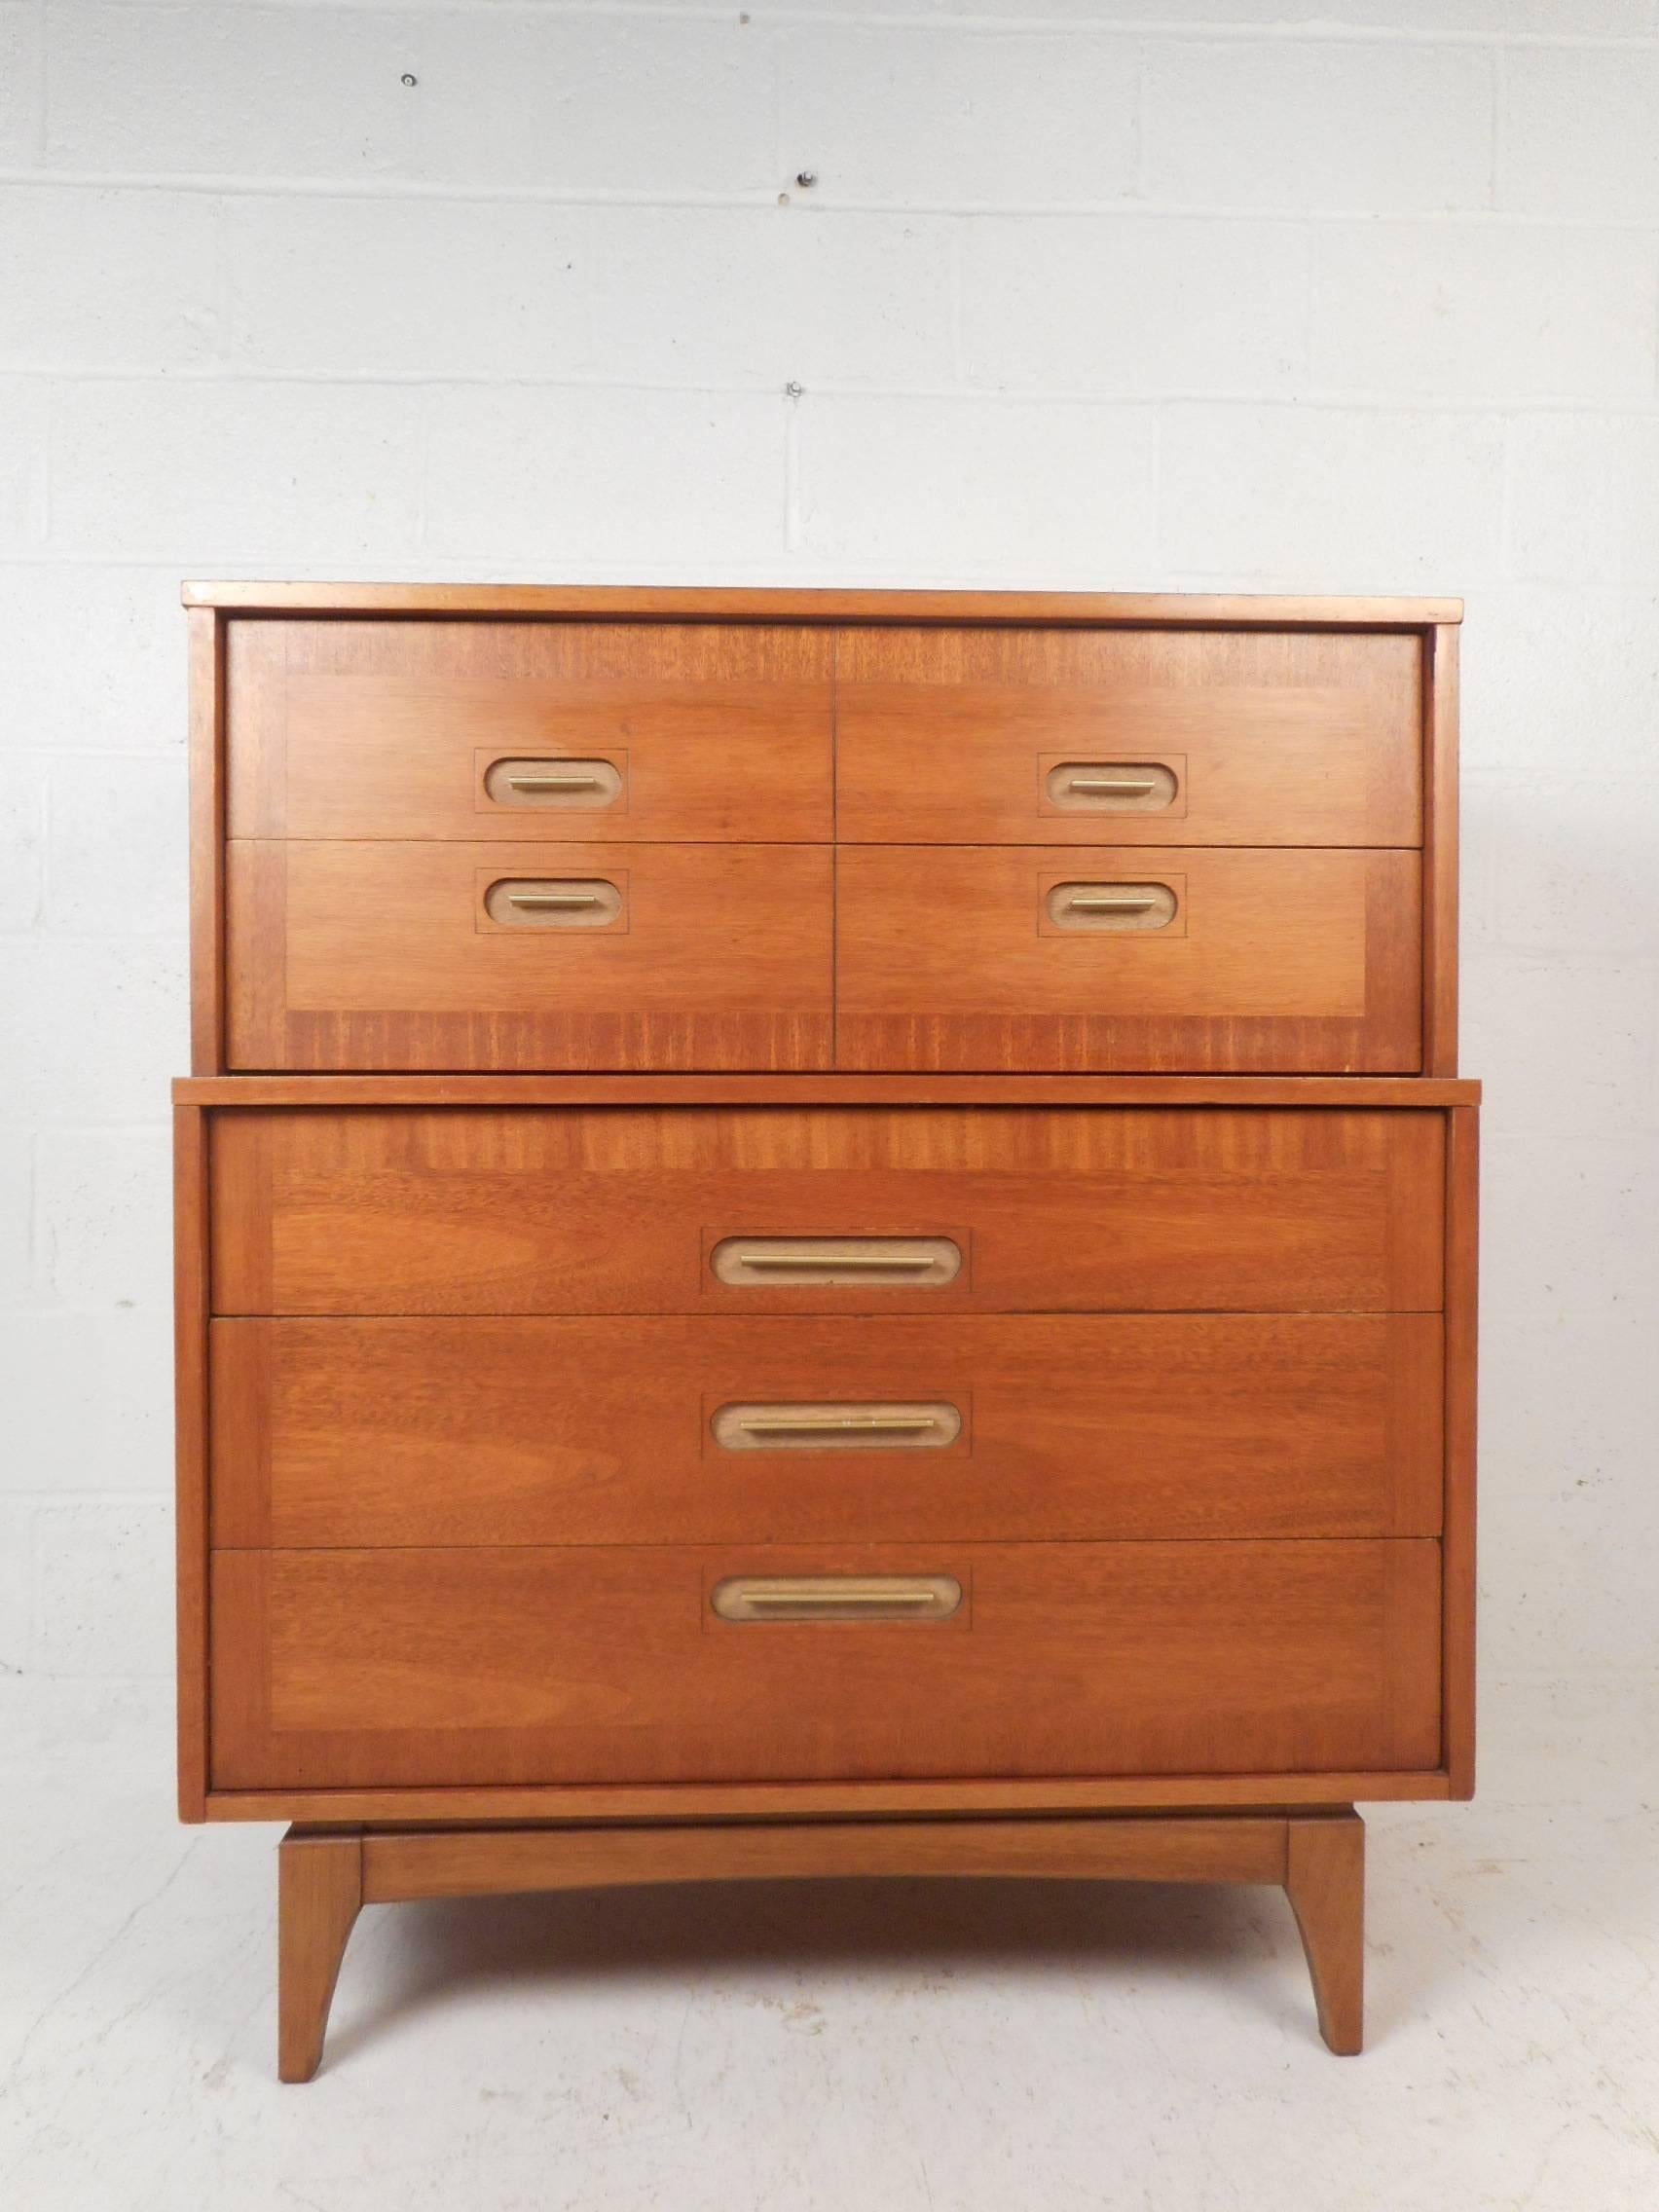 This gorgeous Mid-Century Modern highboy dresser features oval recessed pulls and splayed legs. A sleek case piece with five hefty drawers offering ample storage space. The stacked style straight line design and vintage walnut finish add to the